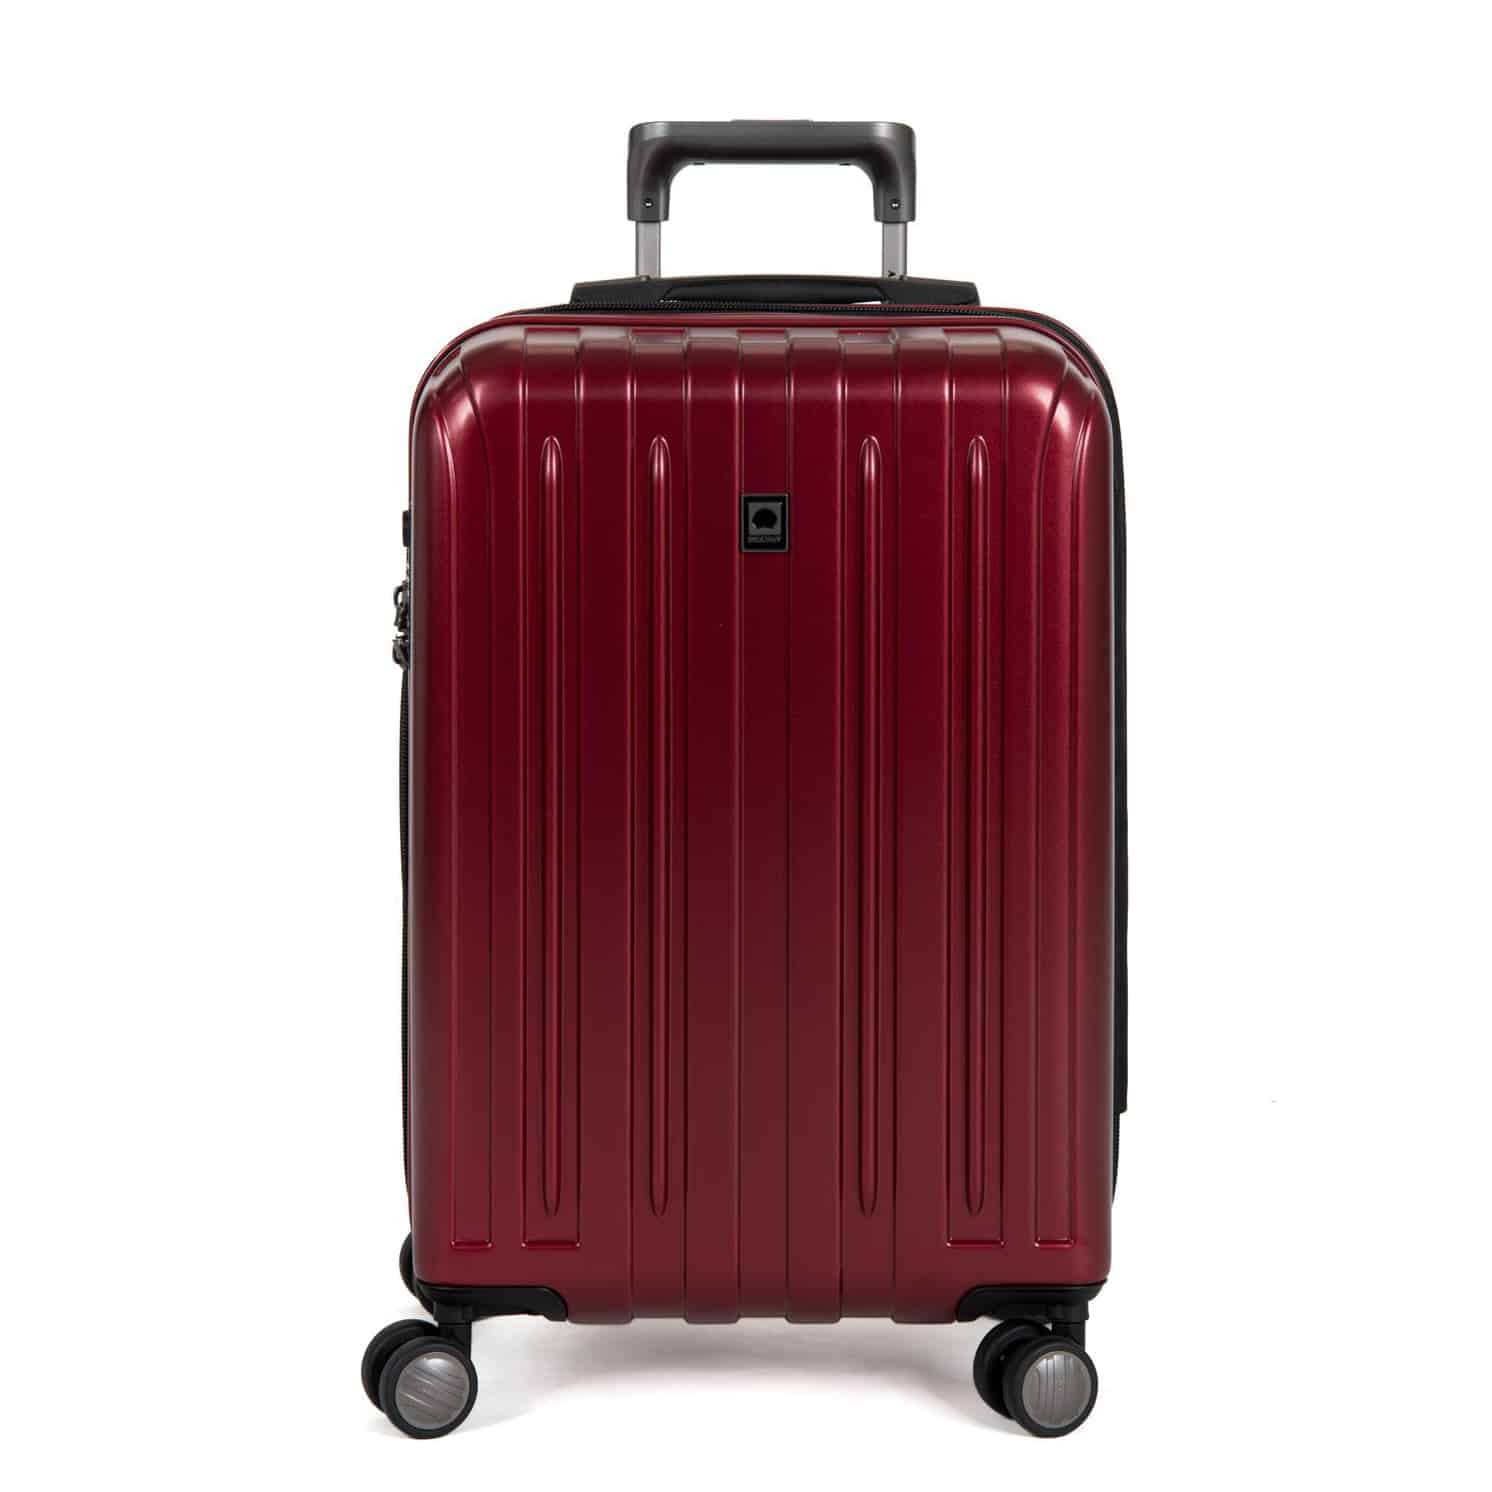 Is Delsey Paris Considered Good Quality Luggage?